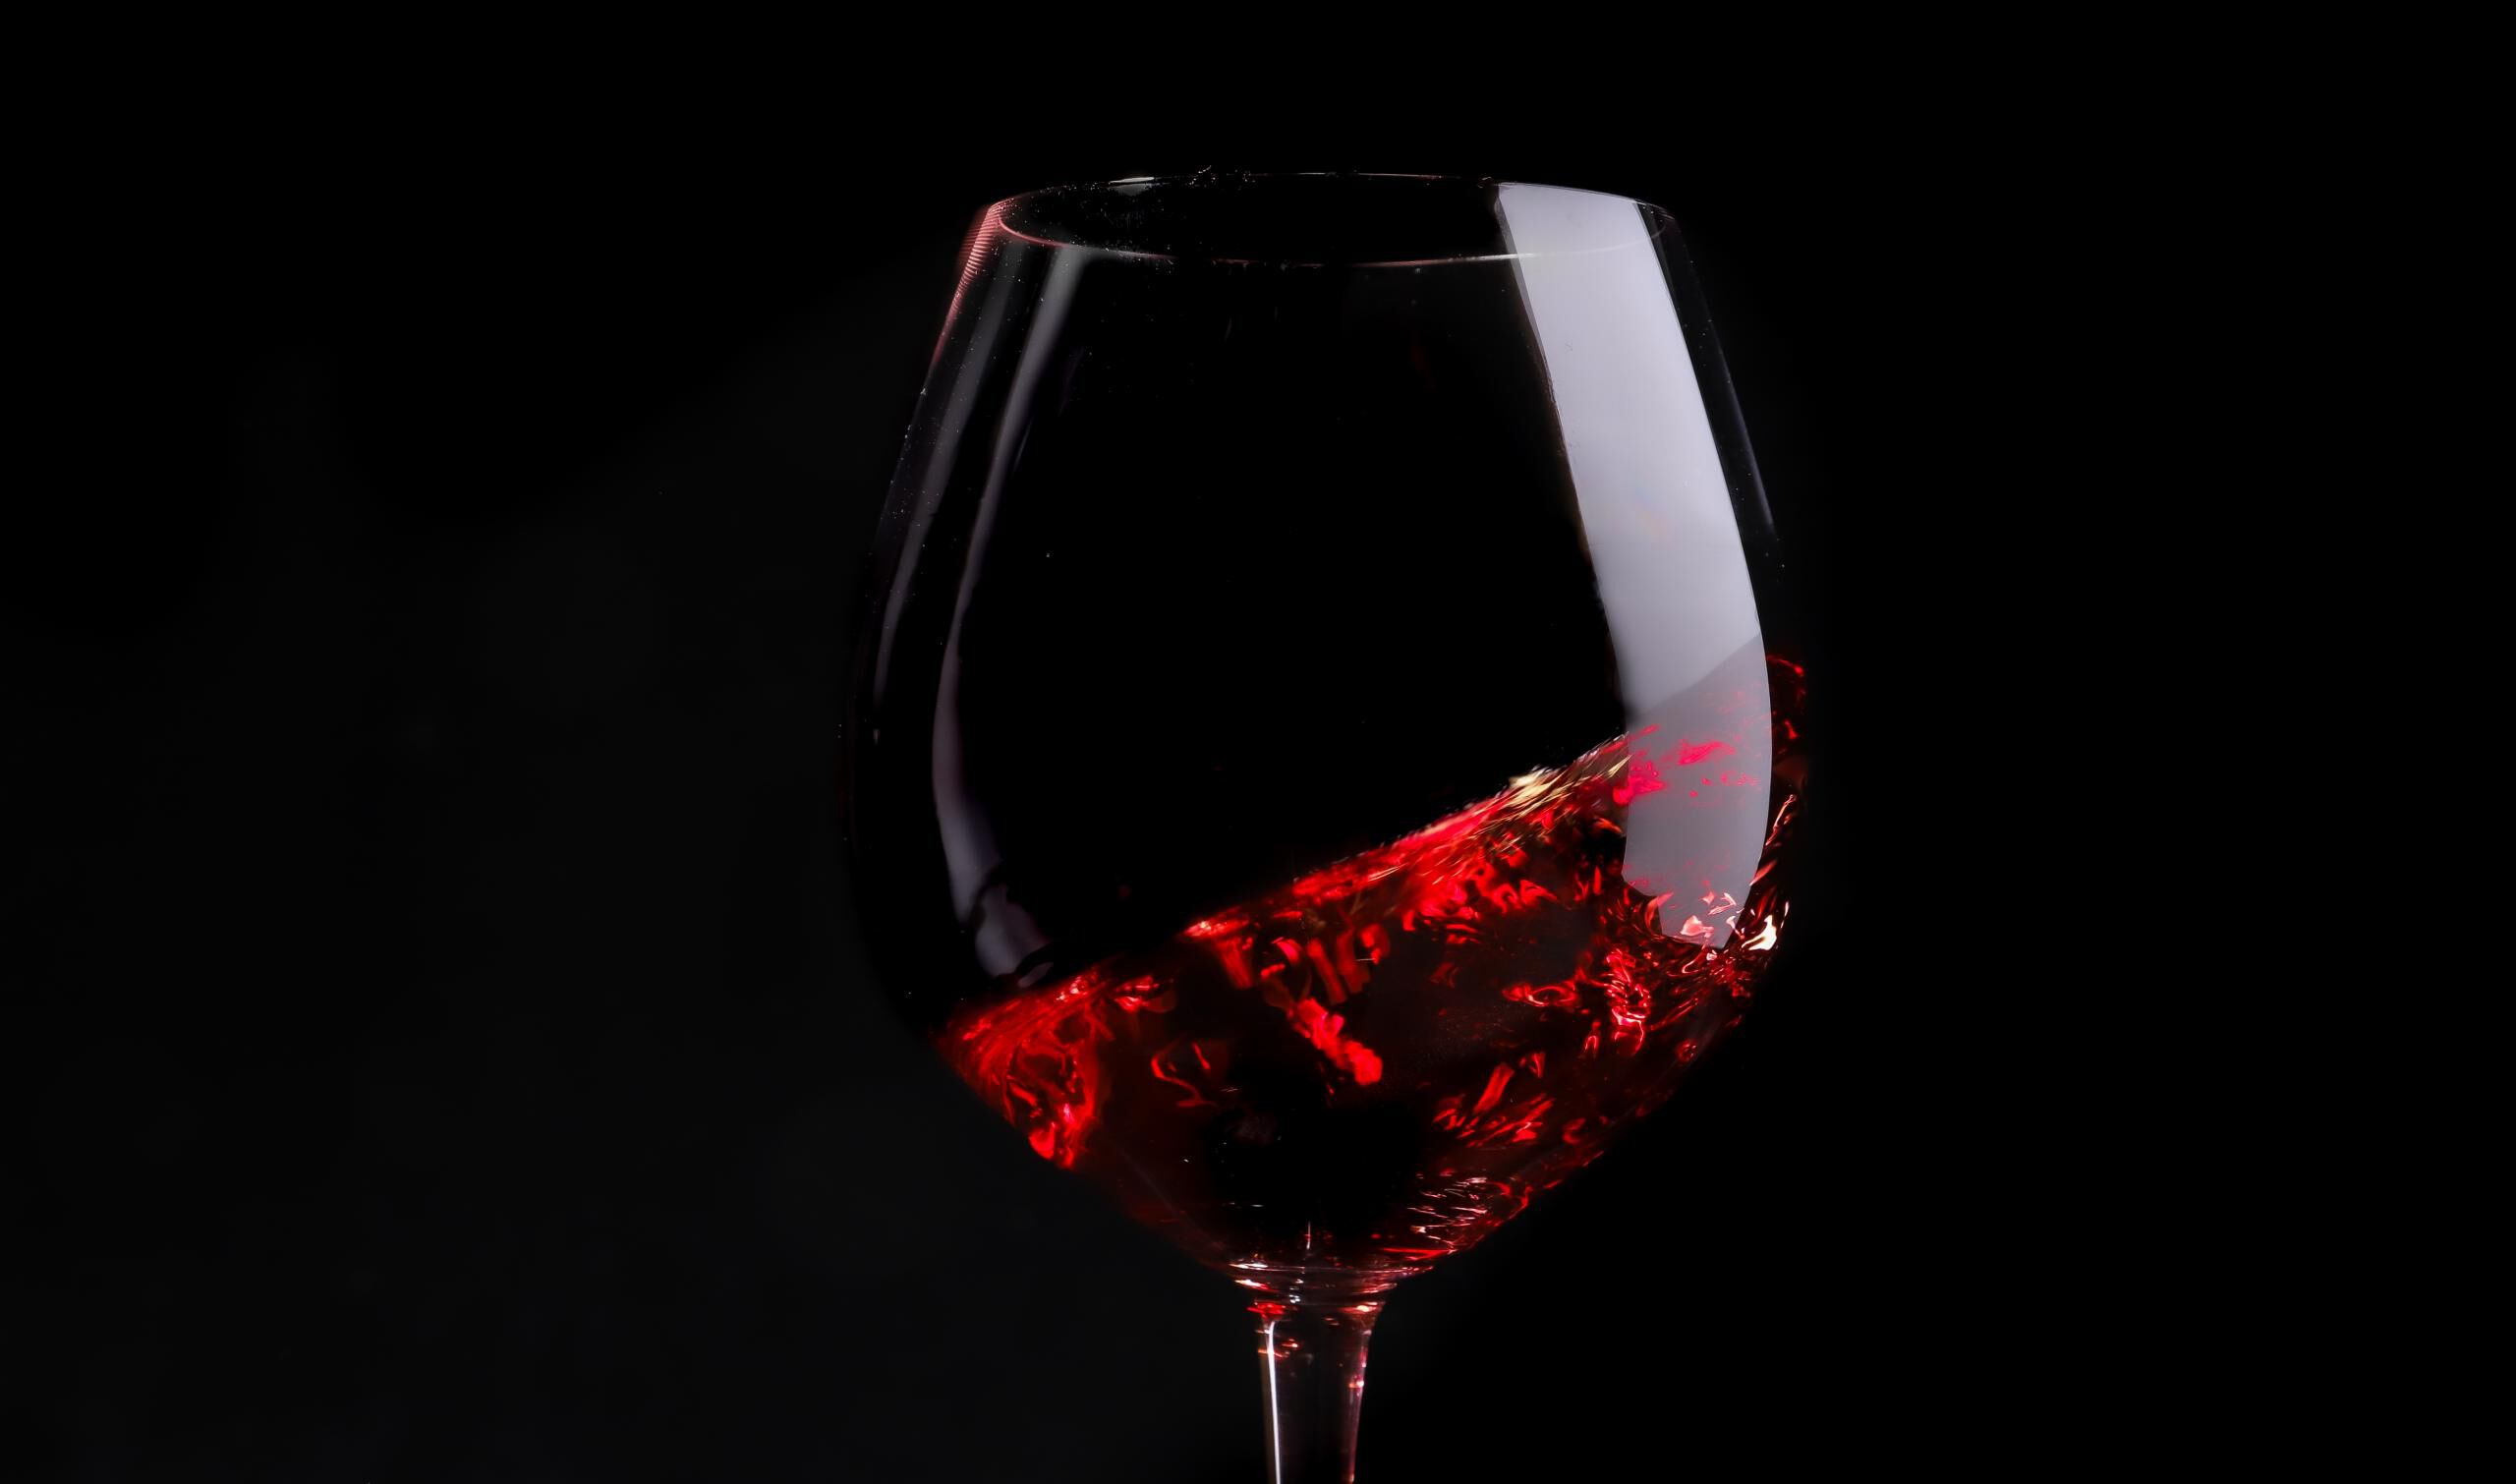 Pinot Noir swirling in a glass against a black background